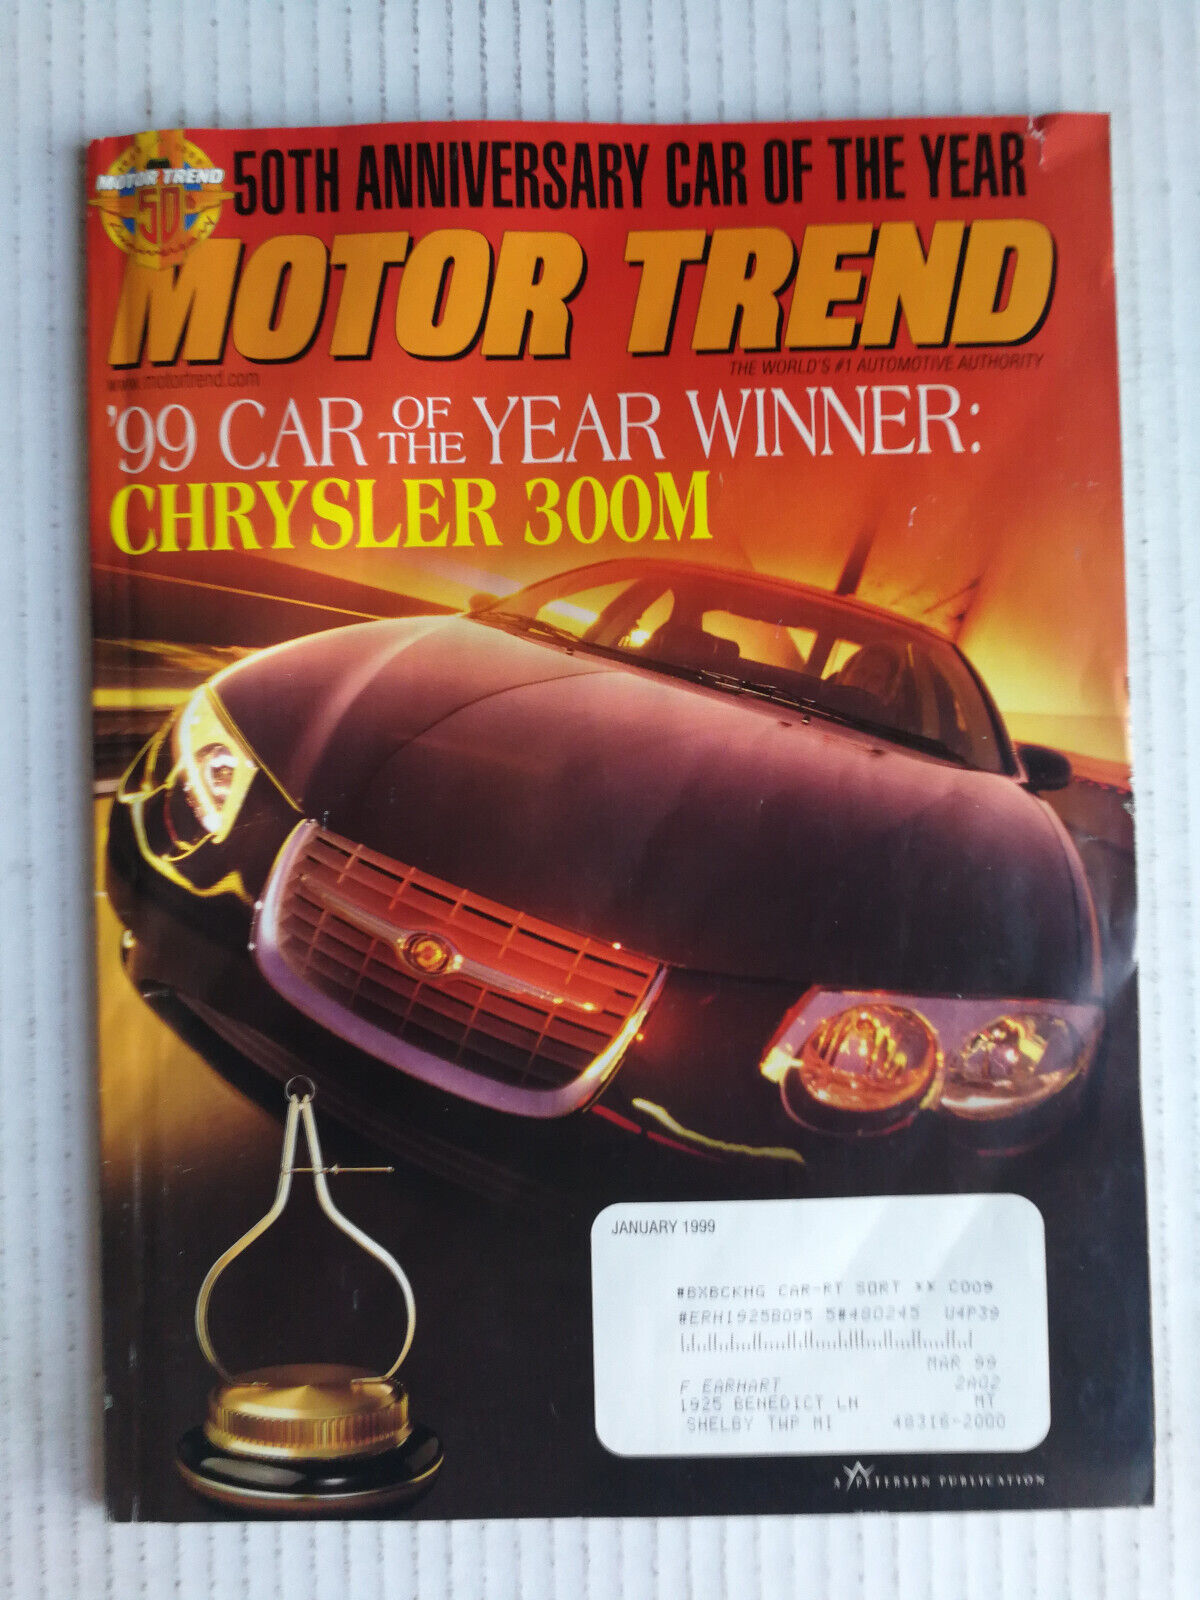 Motor Trend Magazine 1999 - The Complete Year - All 12 Issues